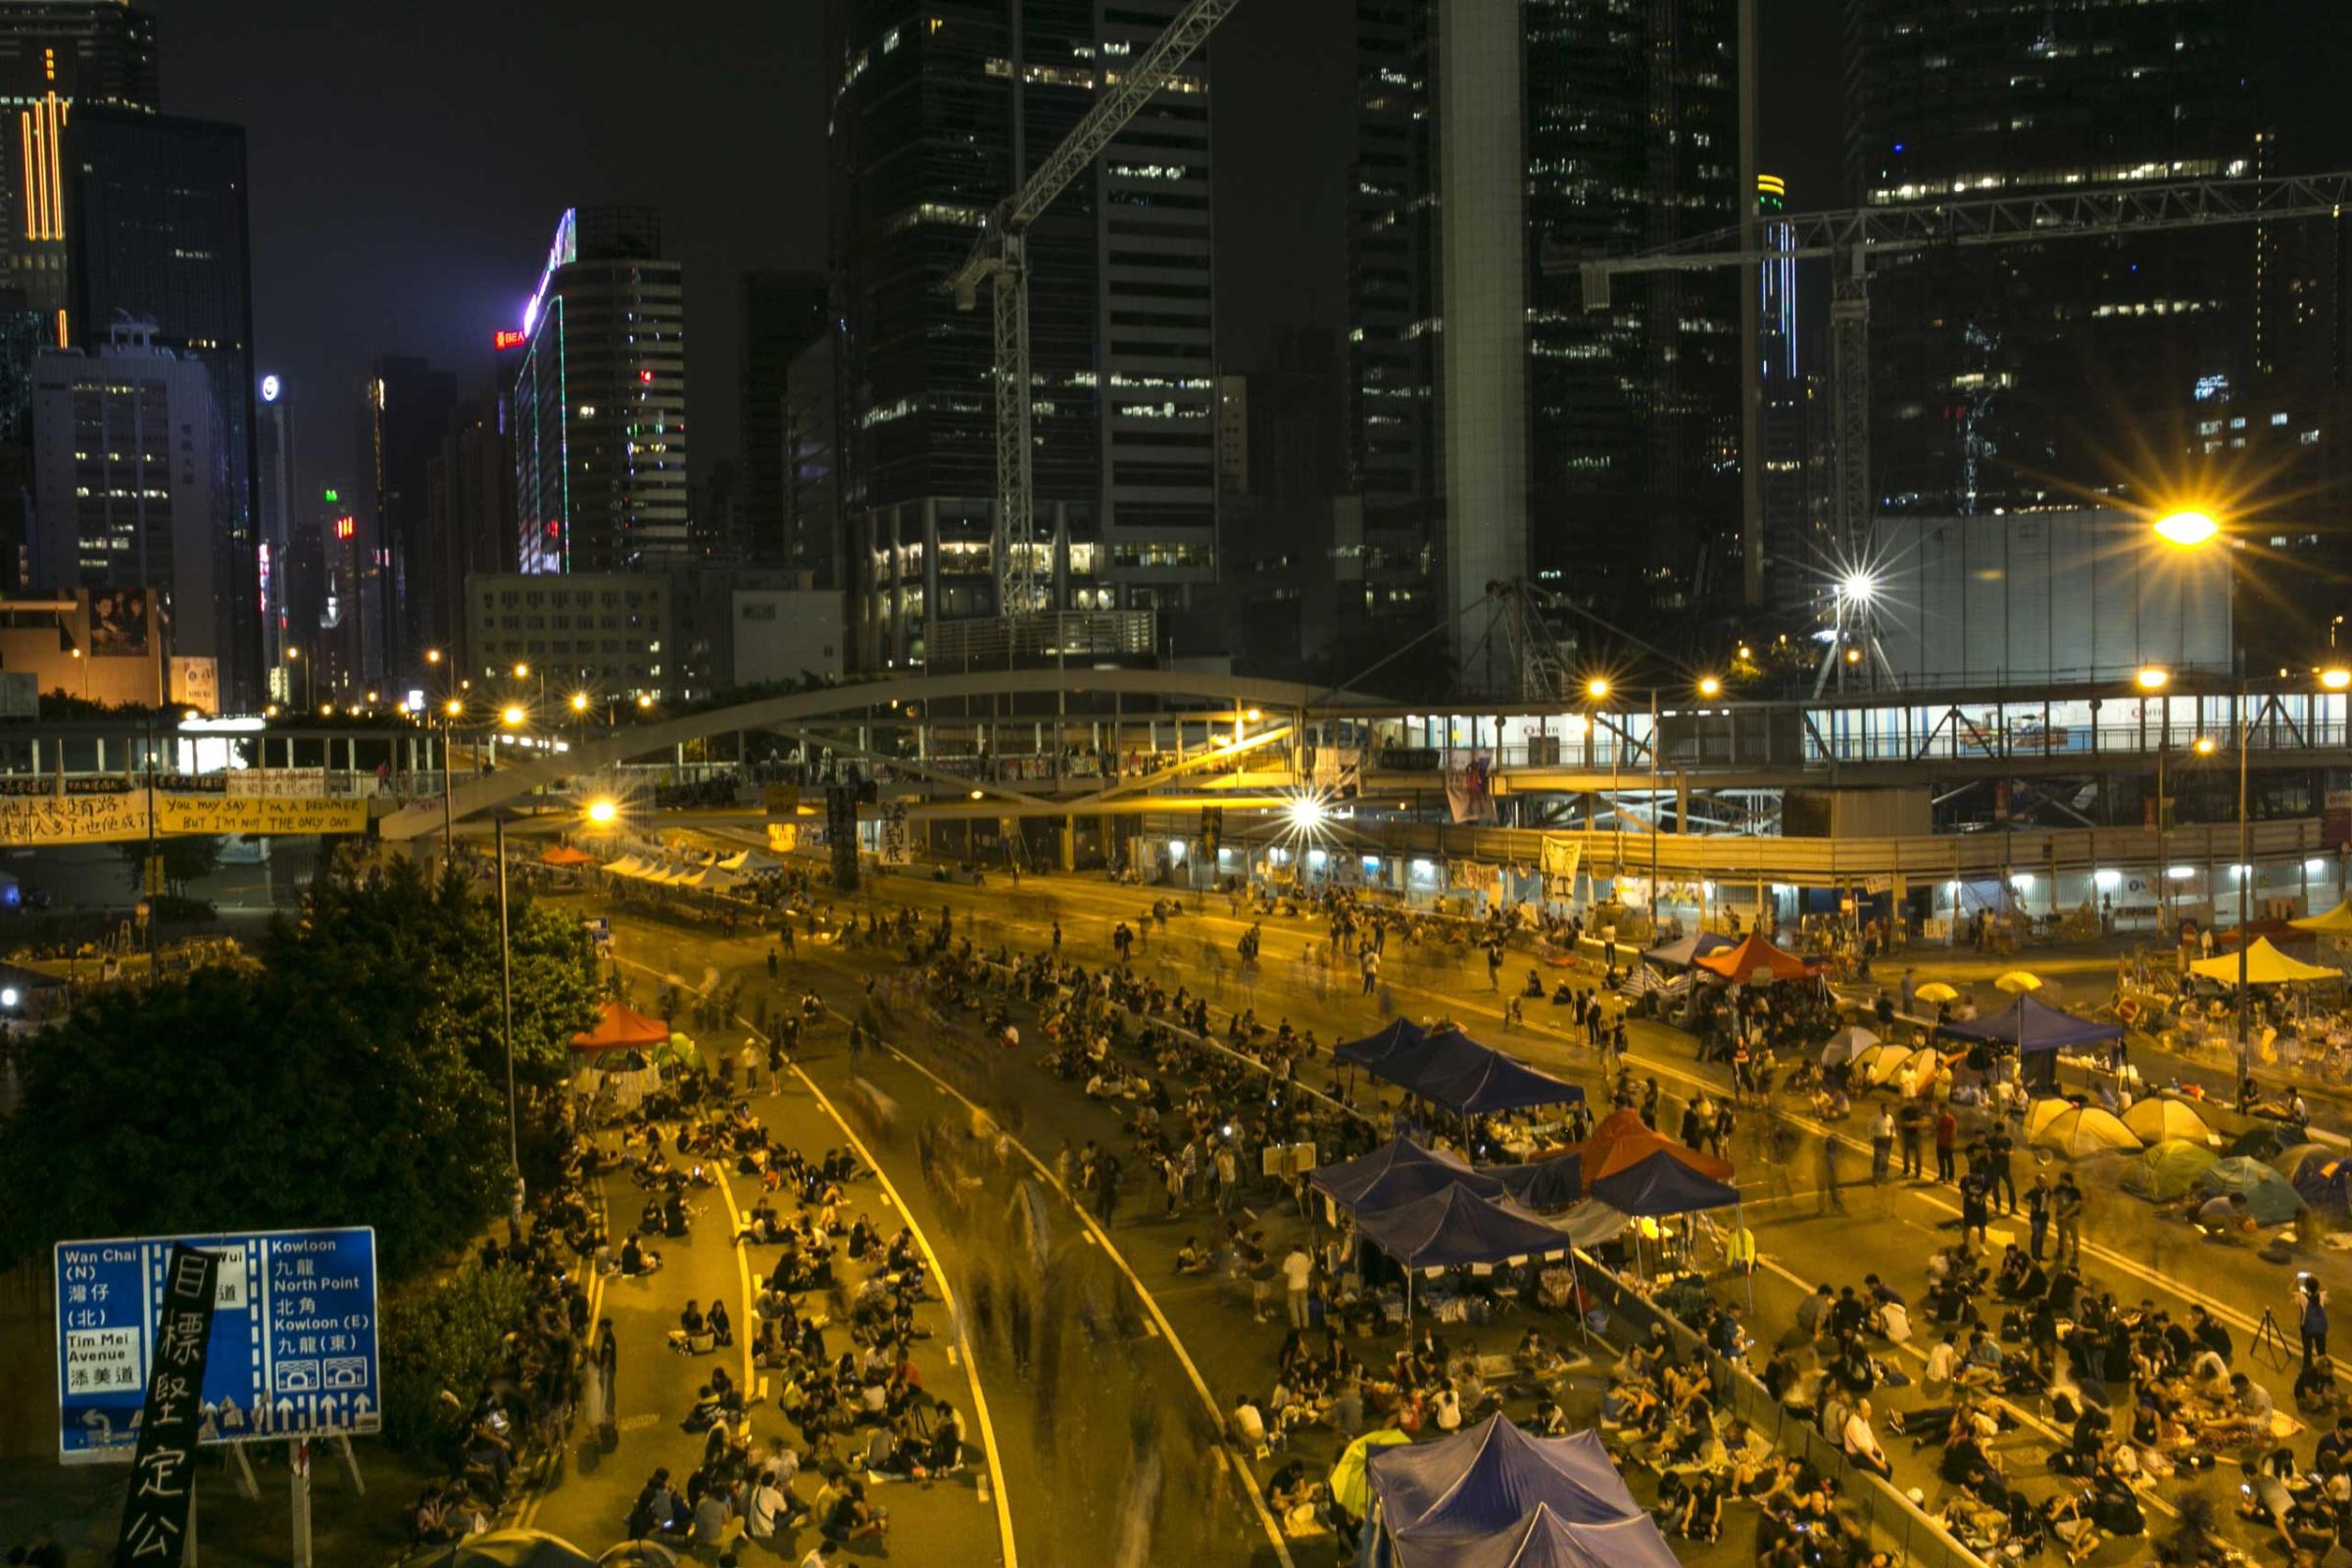 Protesters walk along the protest site on a quiet night as the standoff continues Oct. 5, 2014 in Hong Kong.